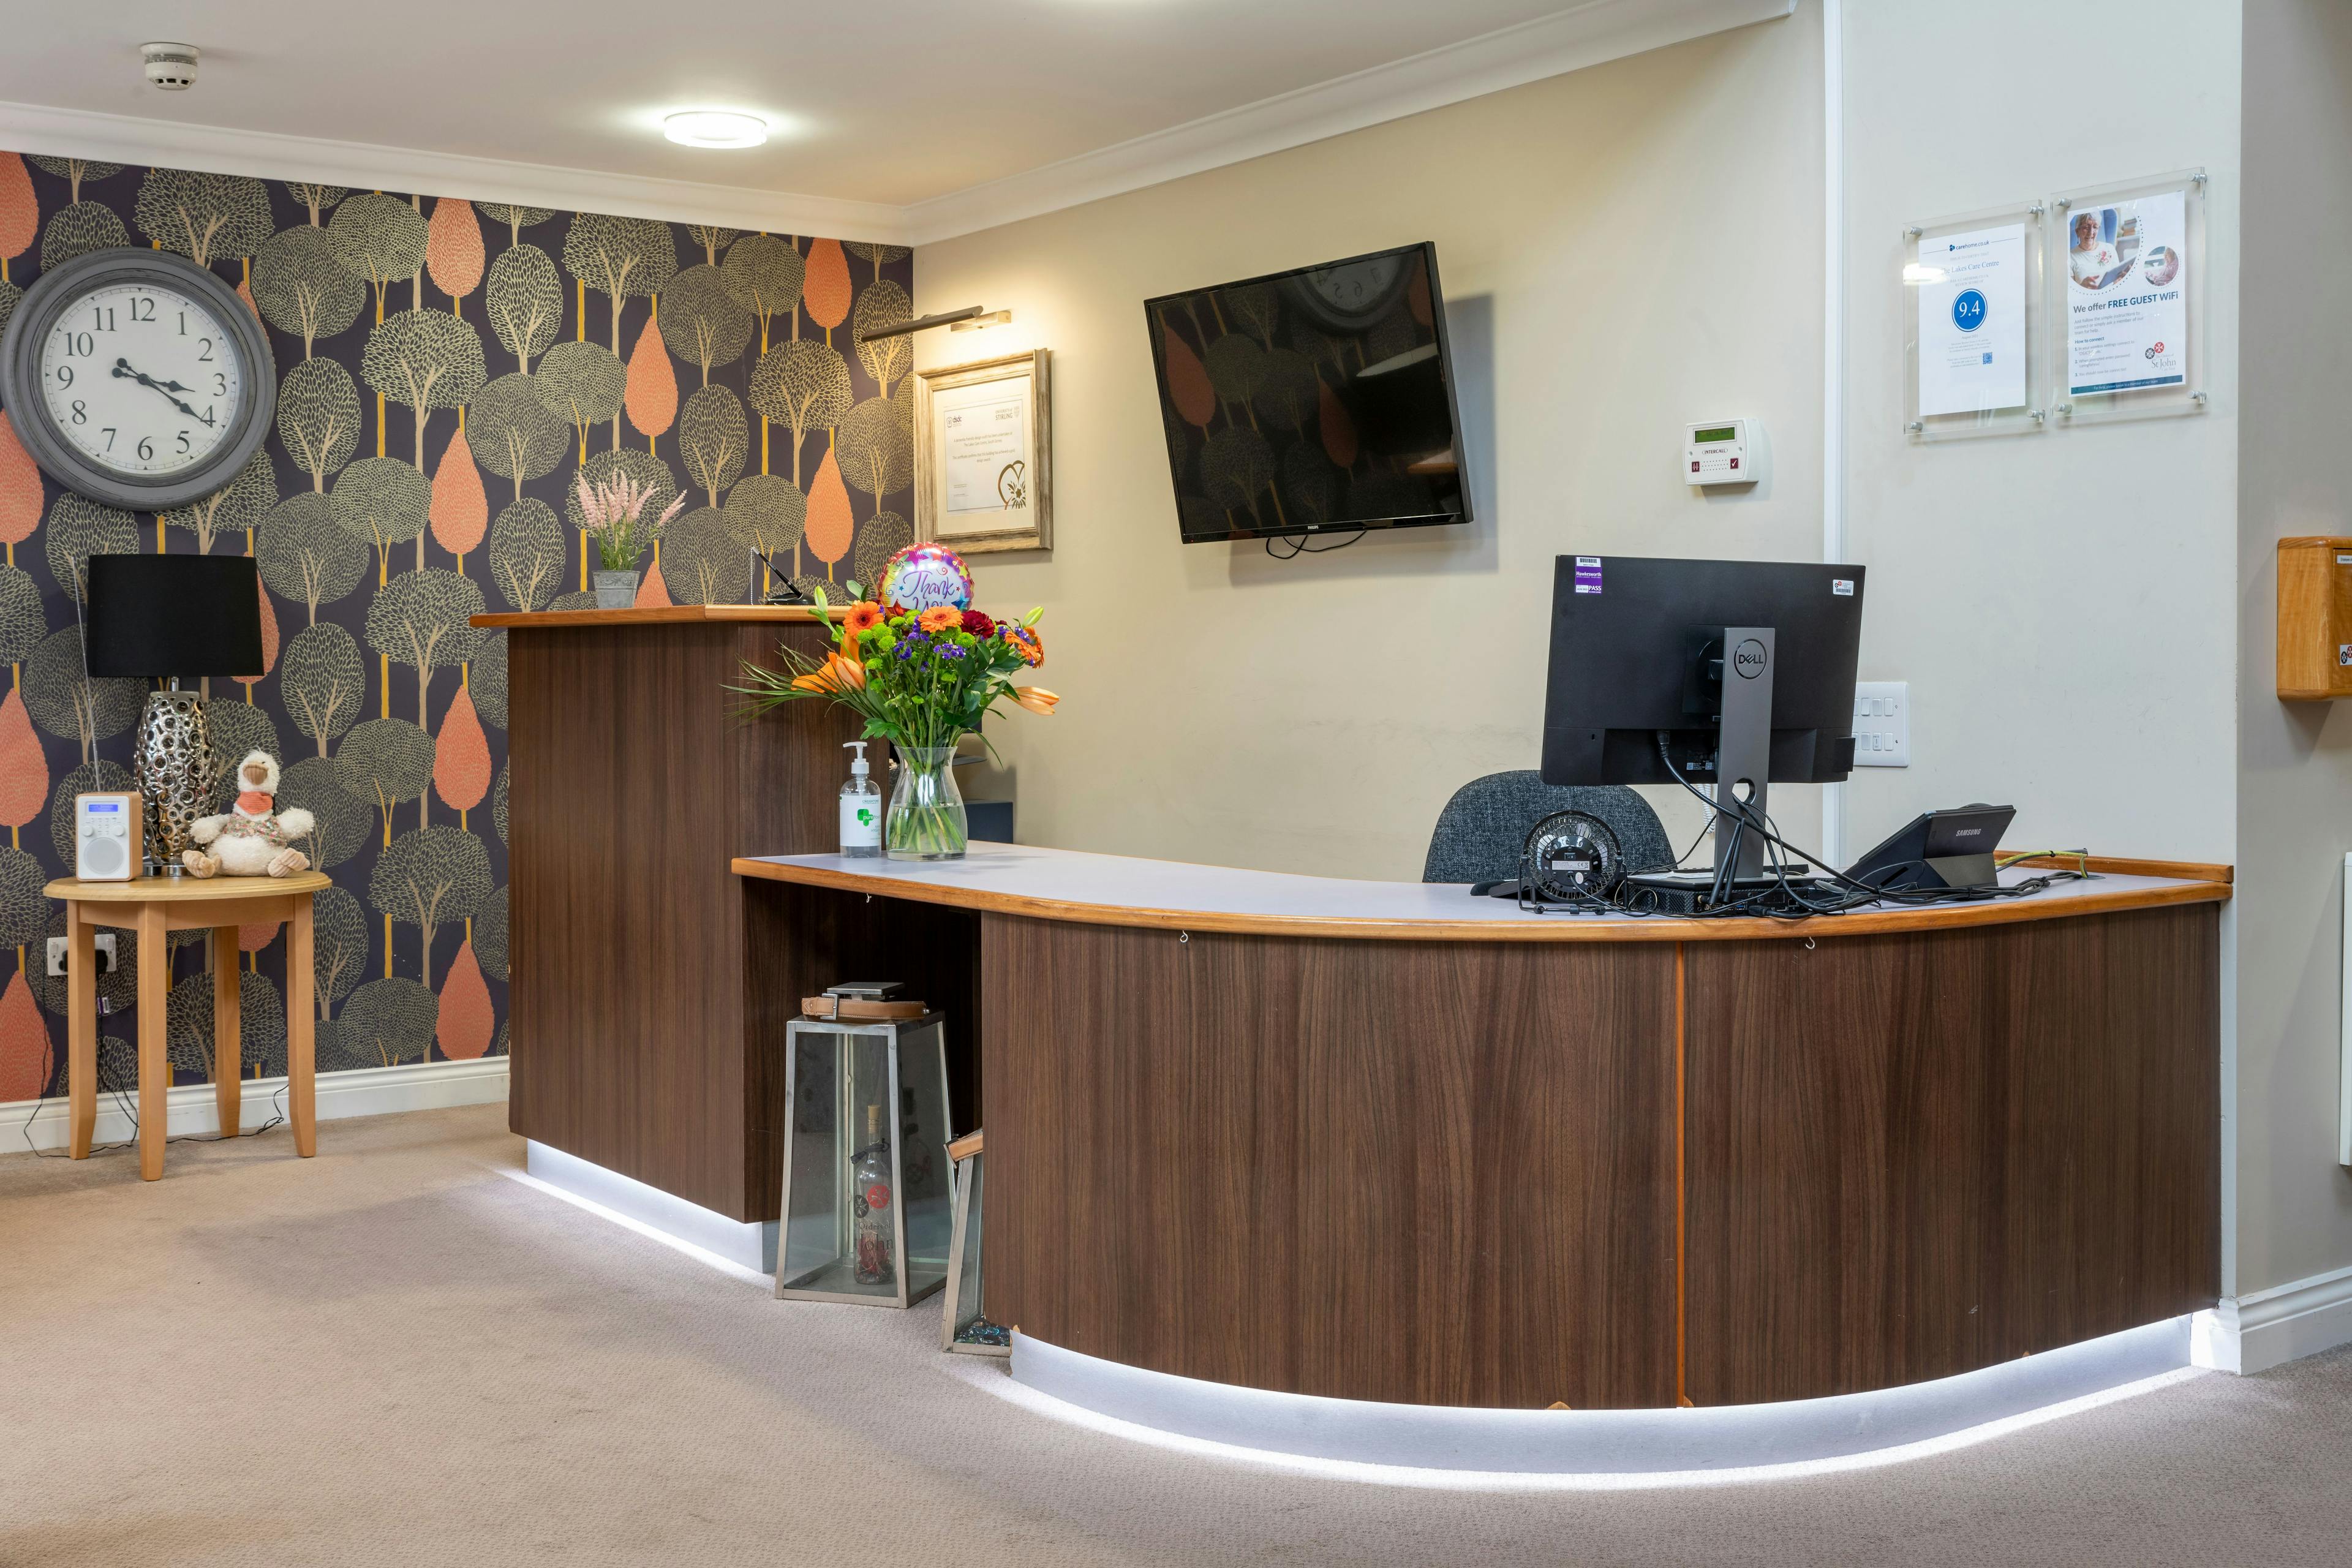 Front Desk at The Lakes Care Home in Cirencester, Cotsworld